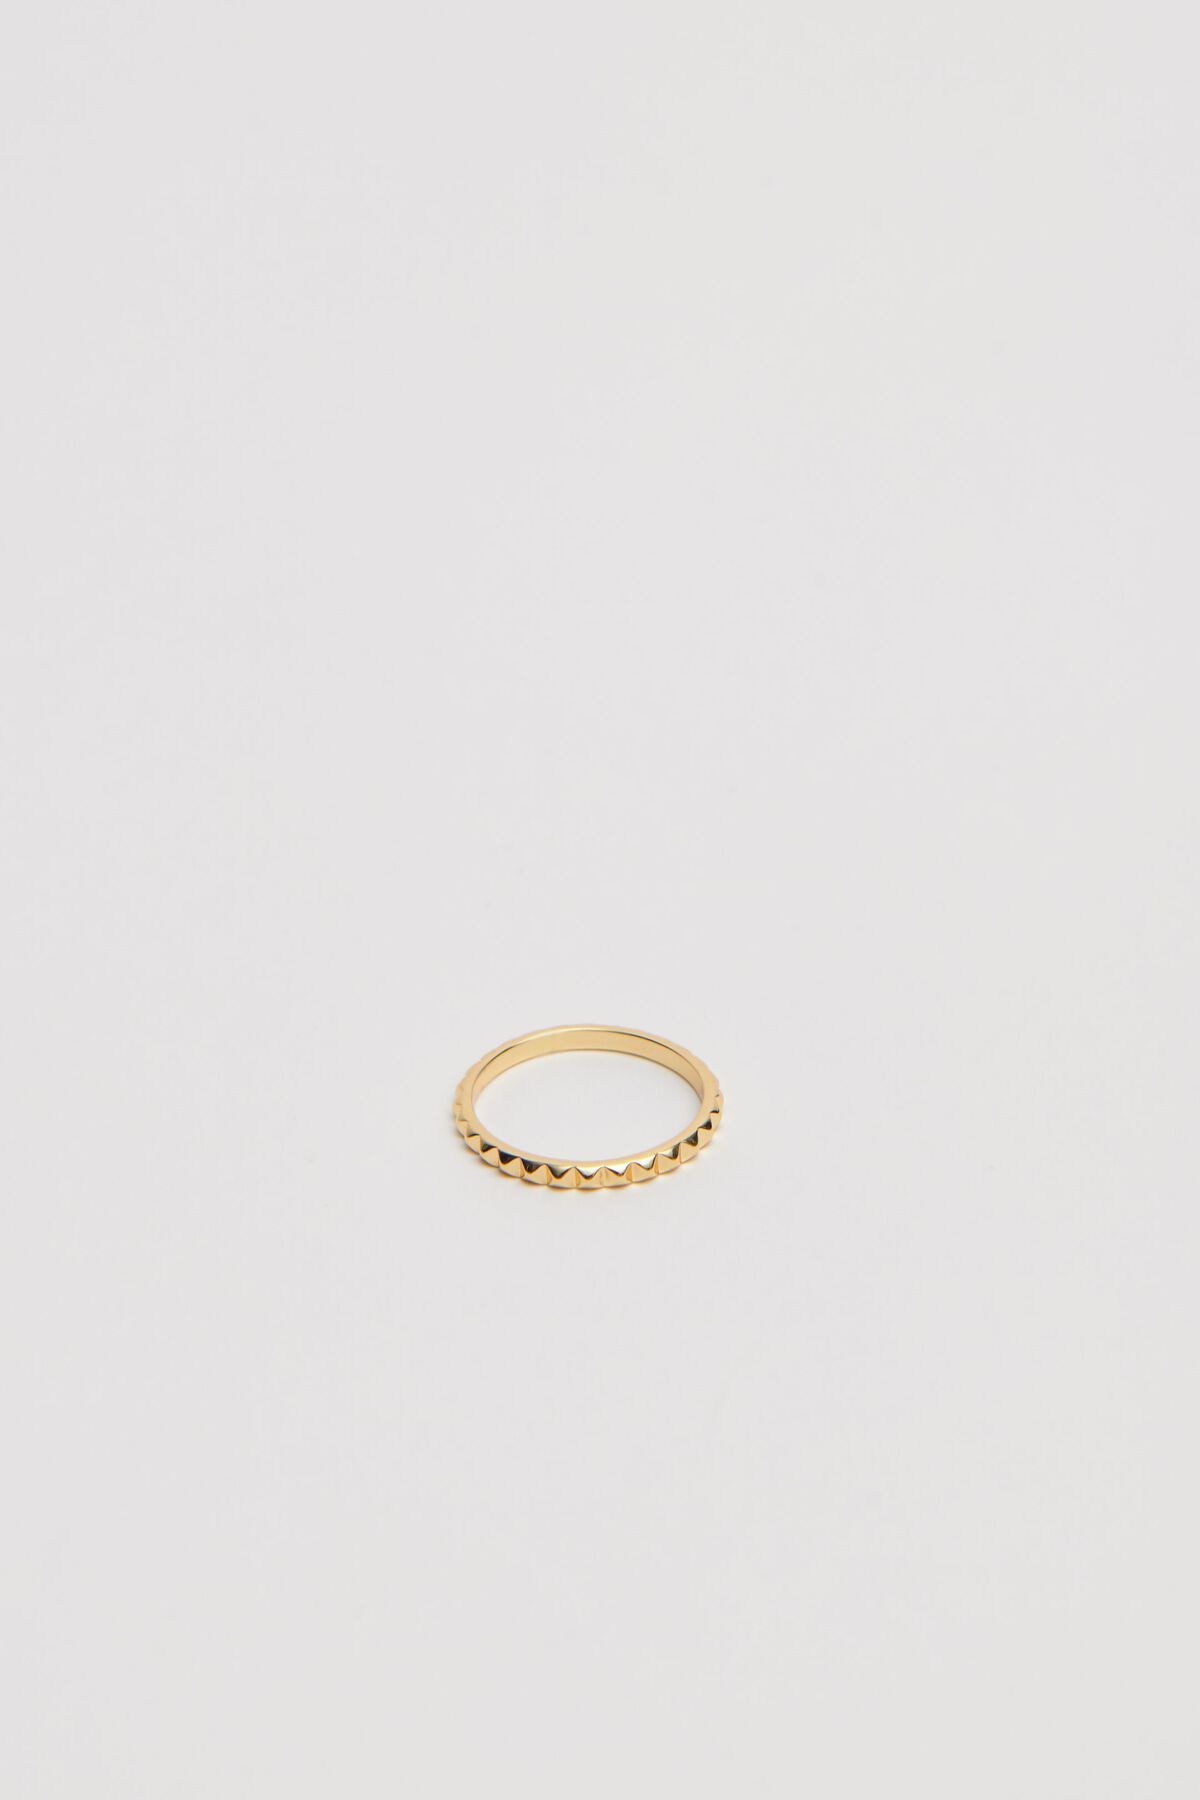 Dynamite 14K Gold Plated Micro Studded Ring. 1